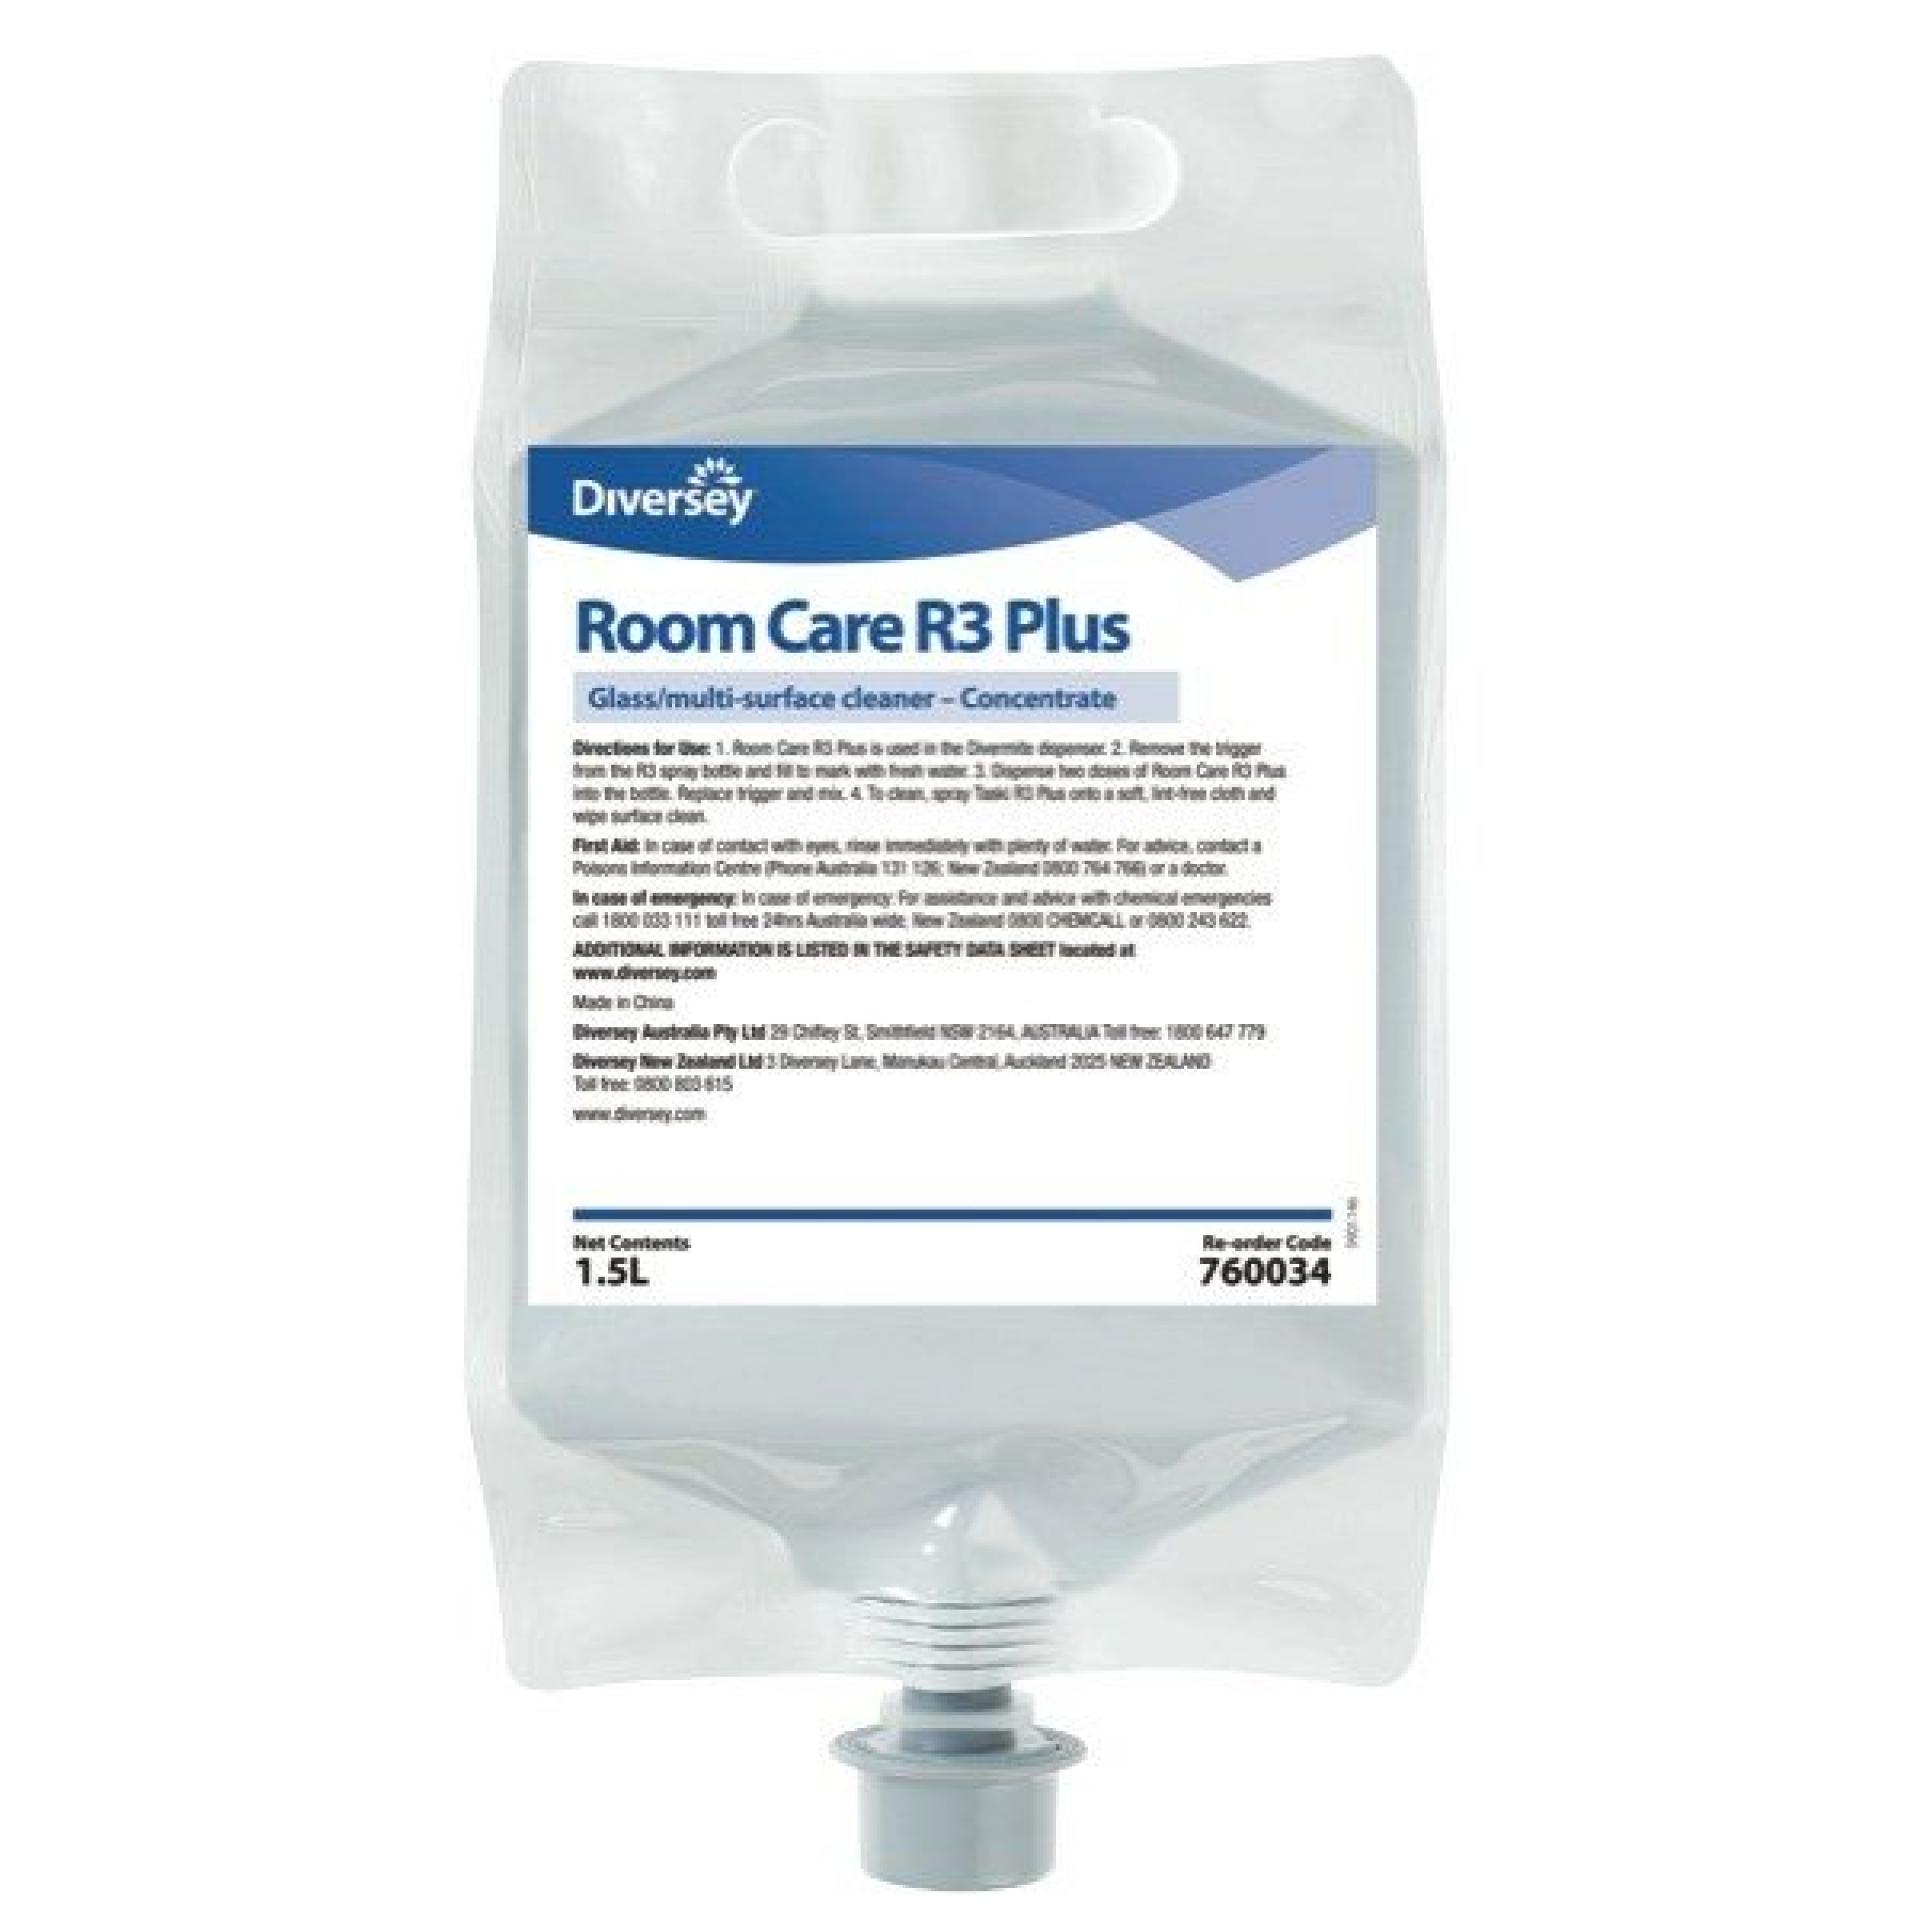 Diversey room care r3